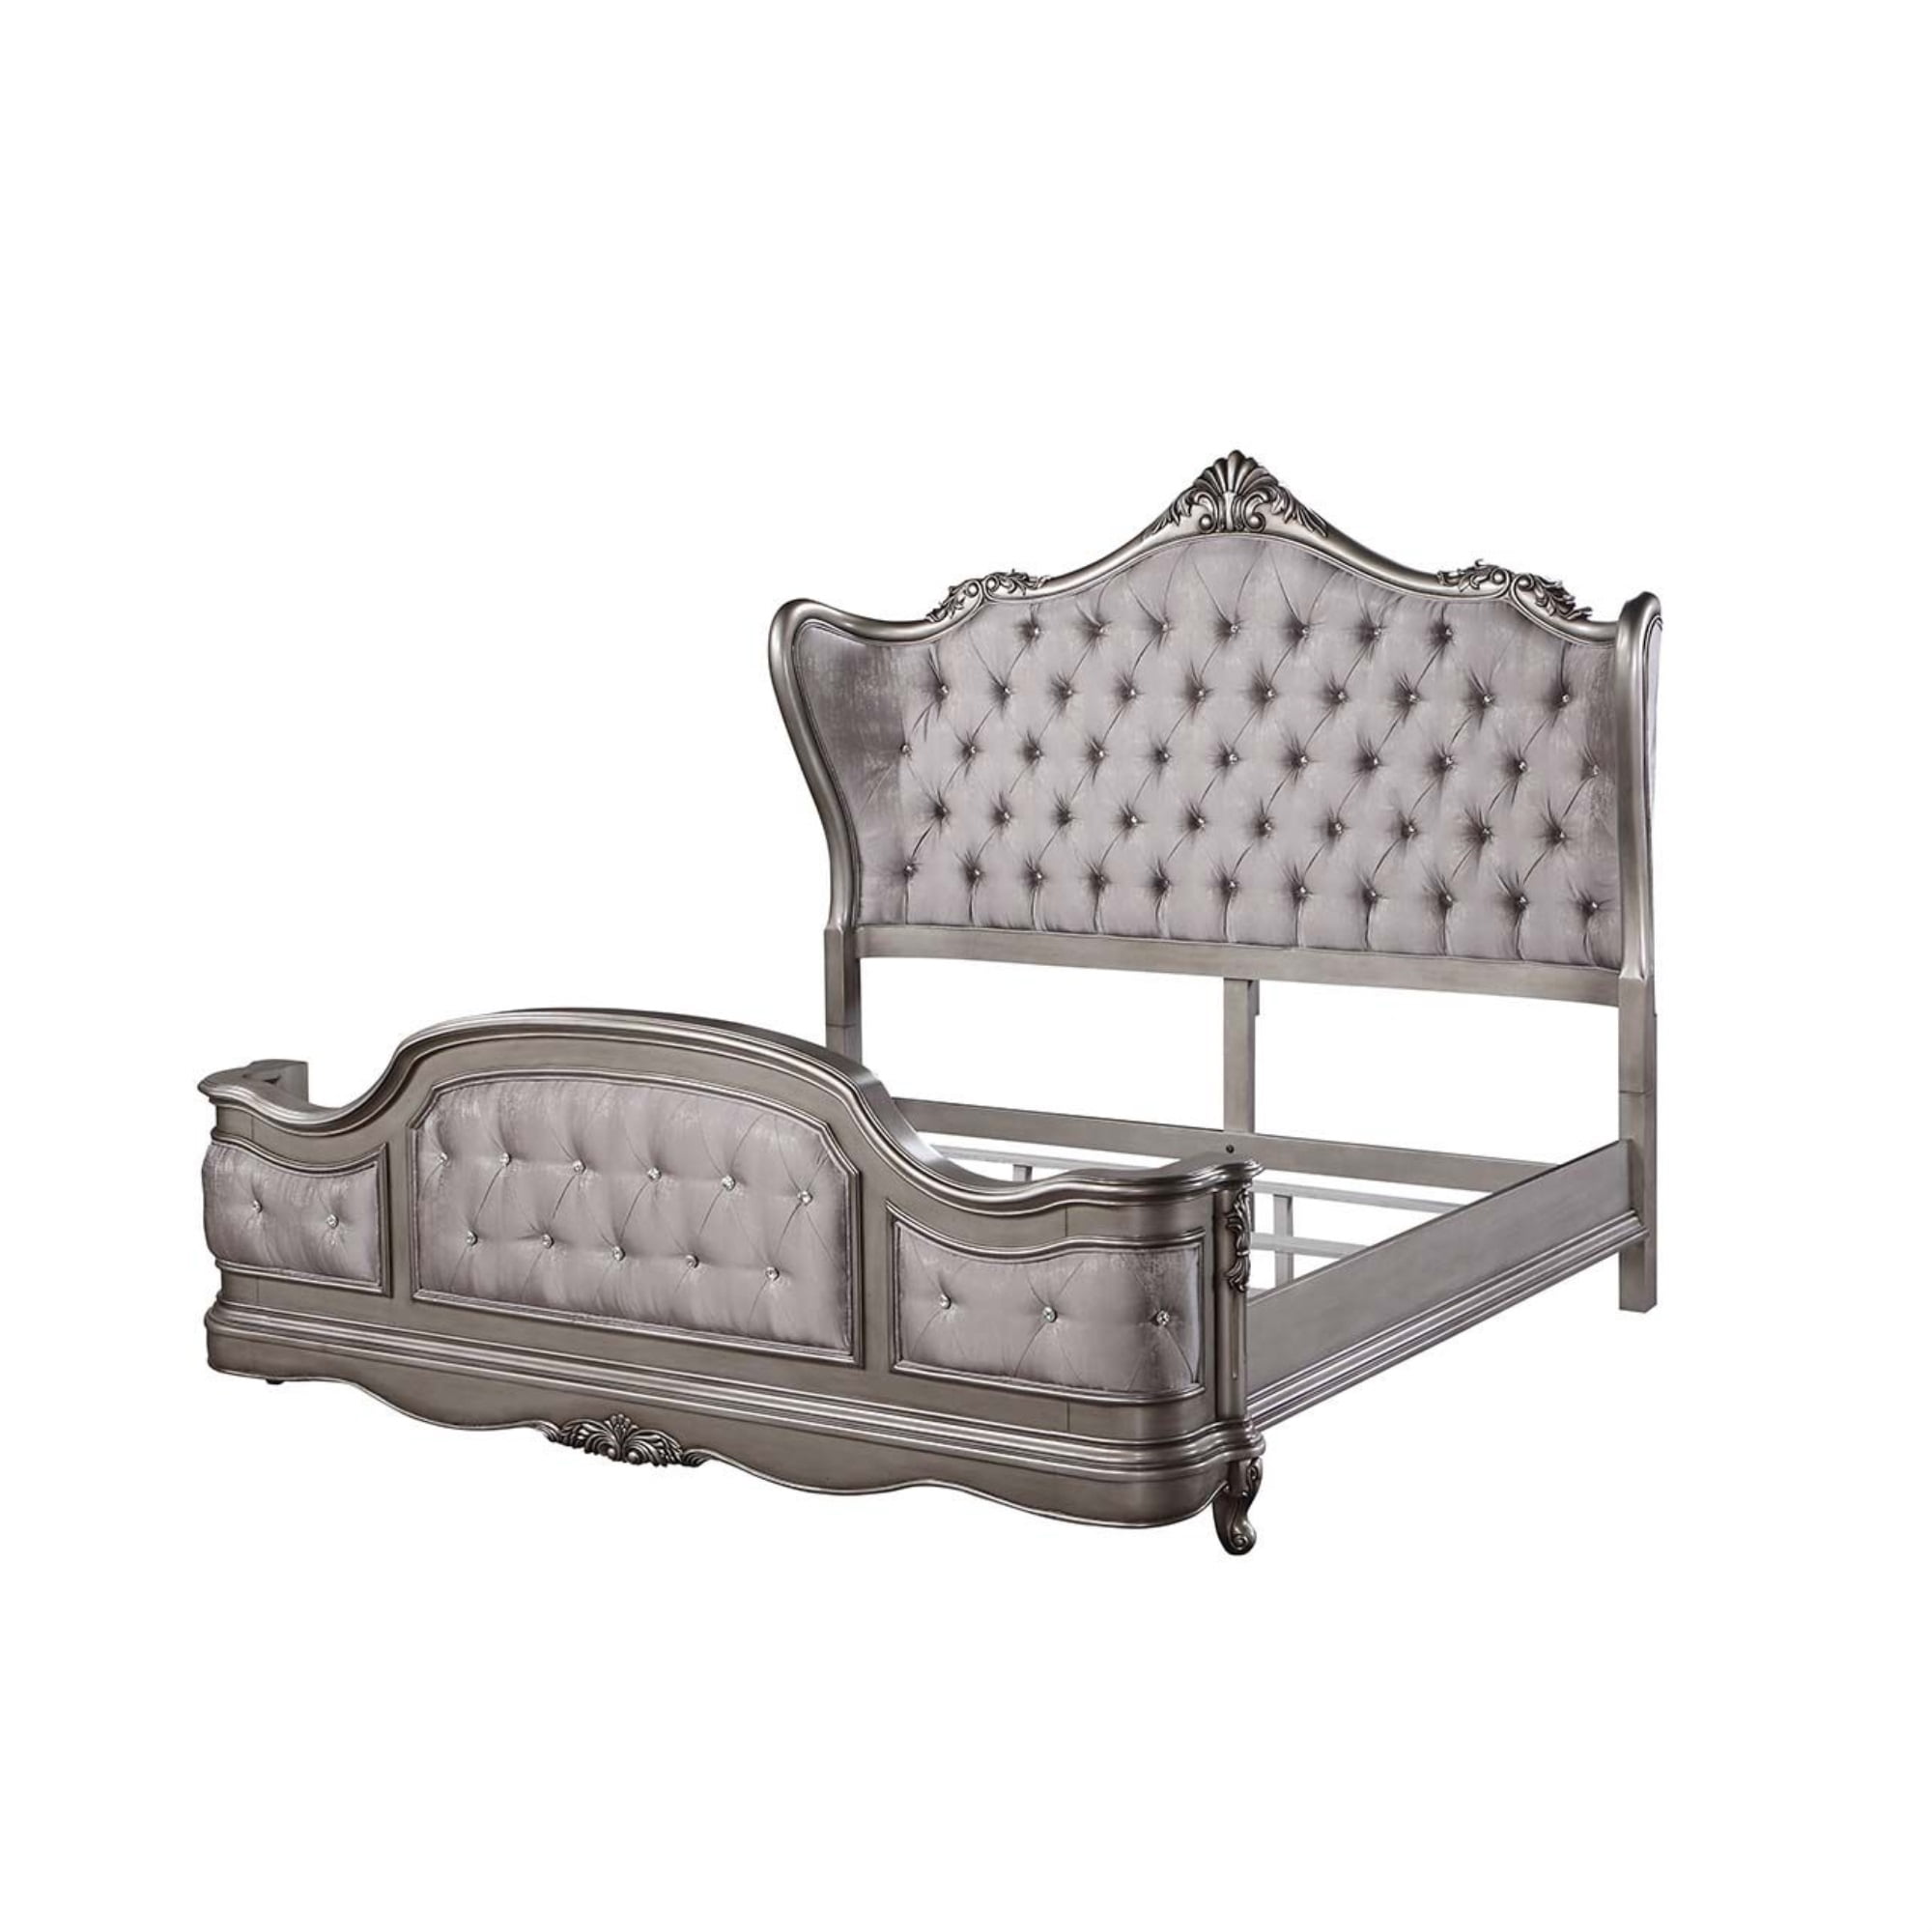 Picture of Acme Furniture BD00602EK 89 x 87 x 71 in. Ausonia Eastern Bed, Antique Platinum - King Size